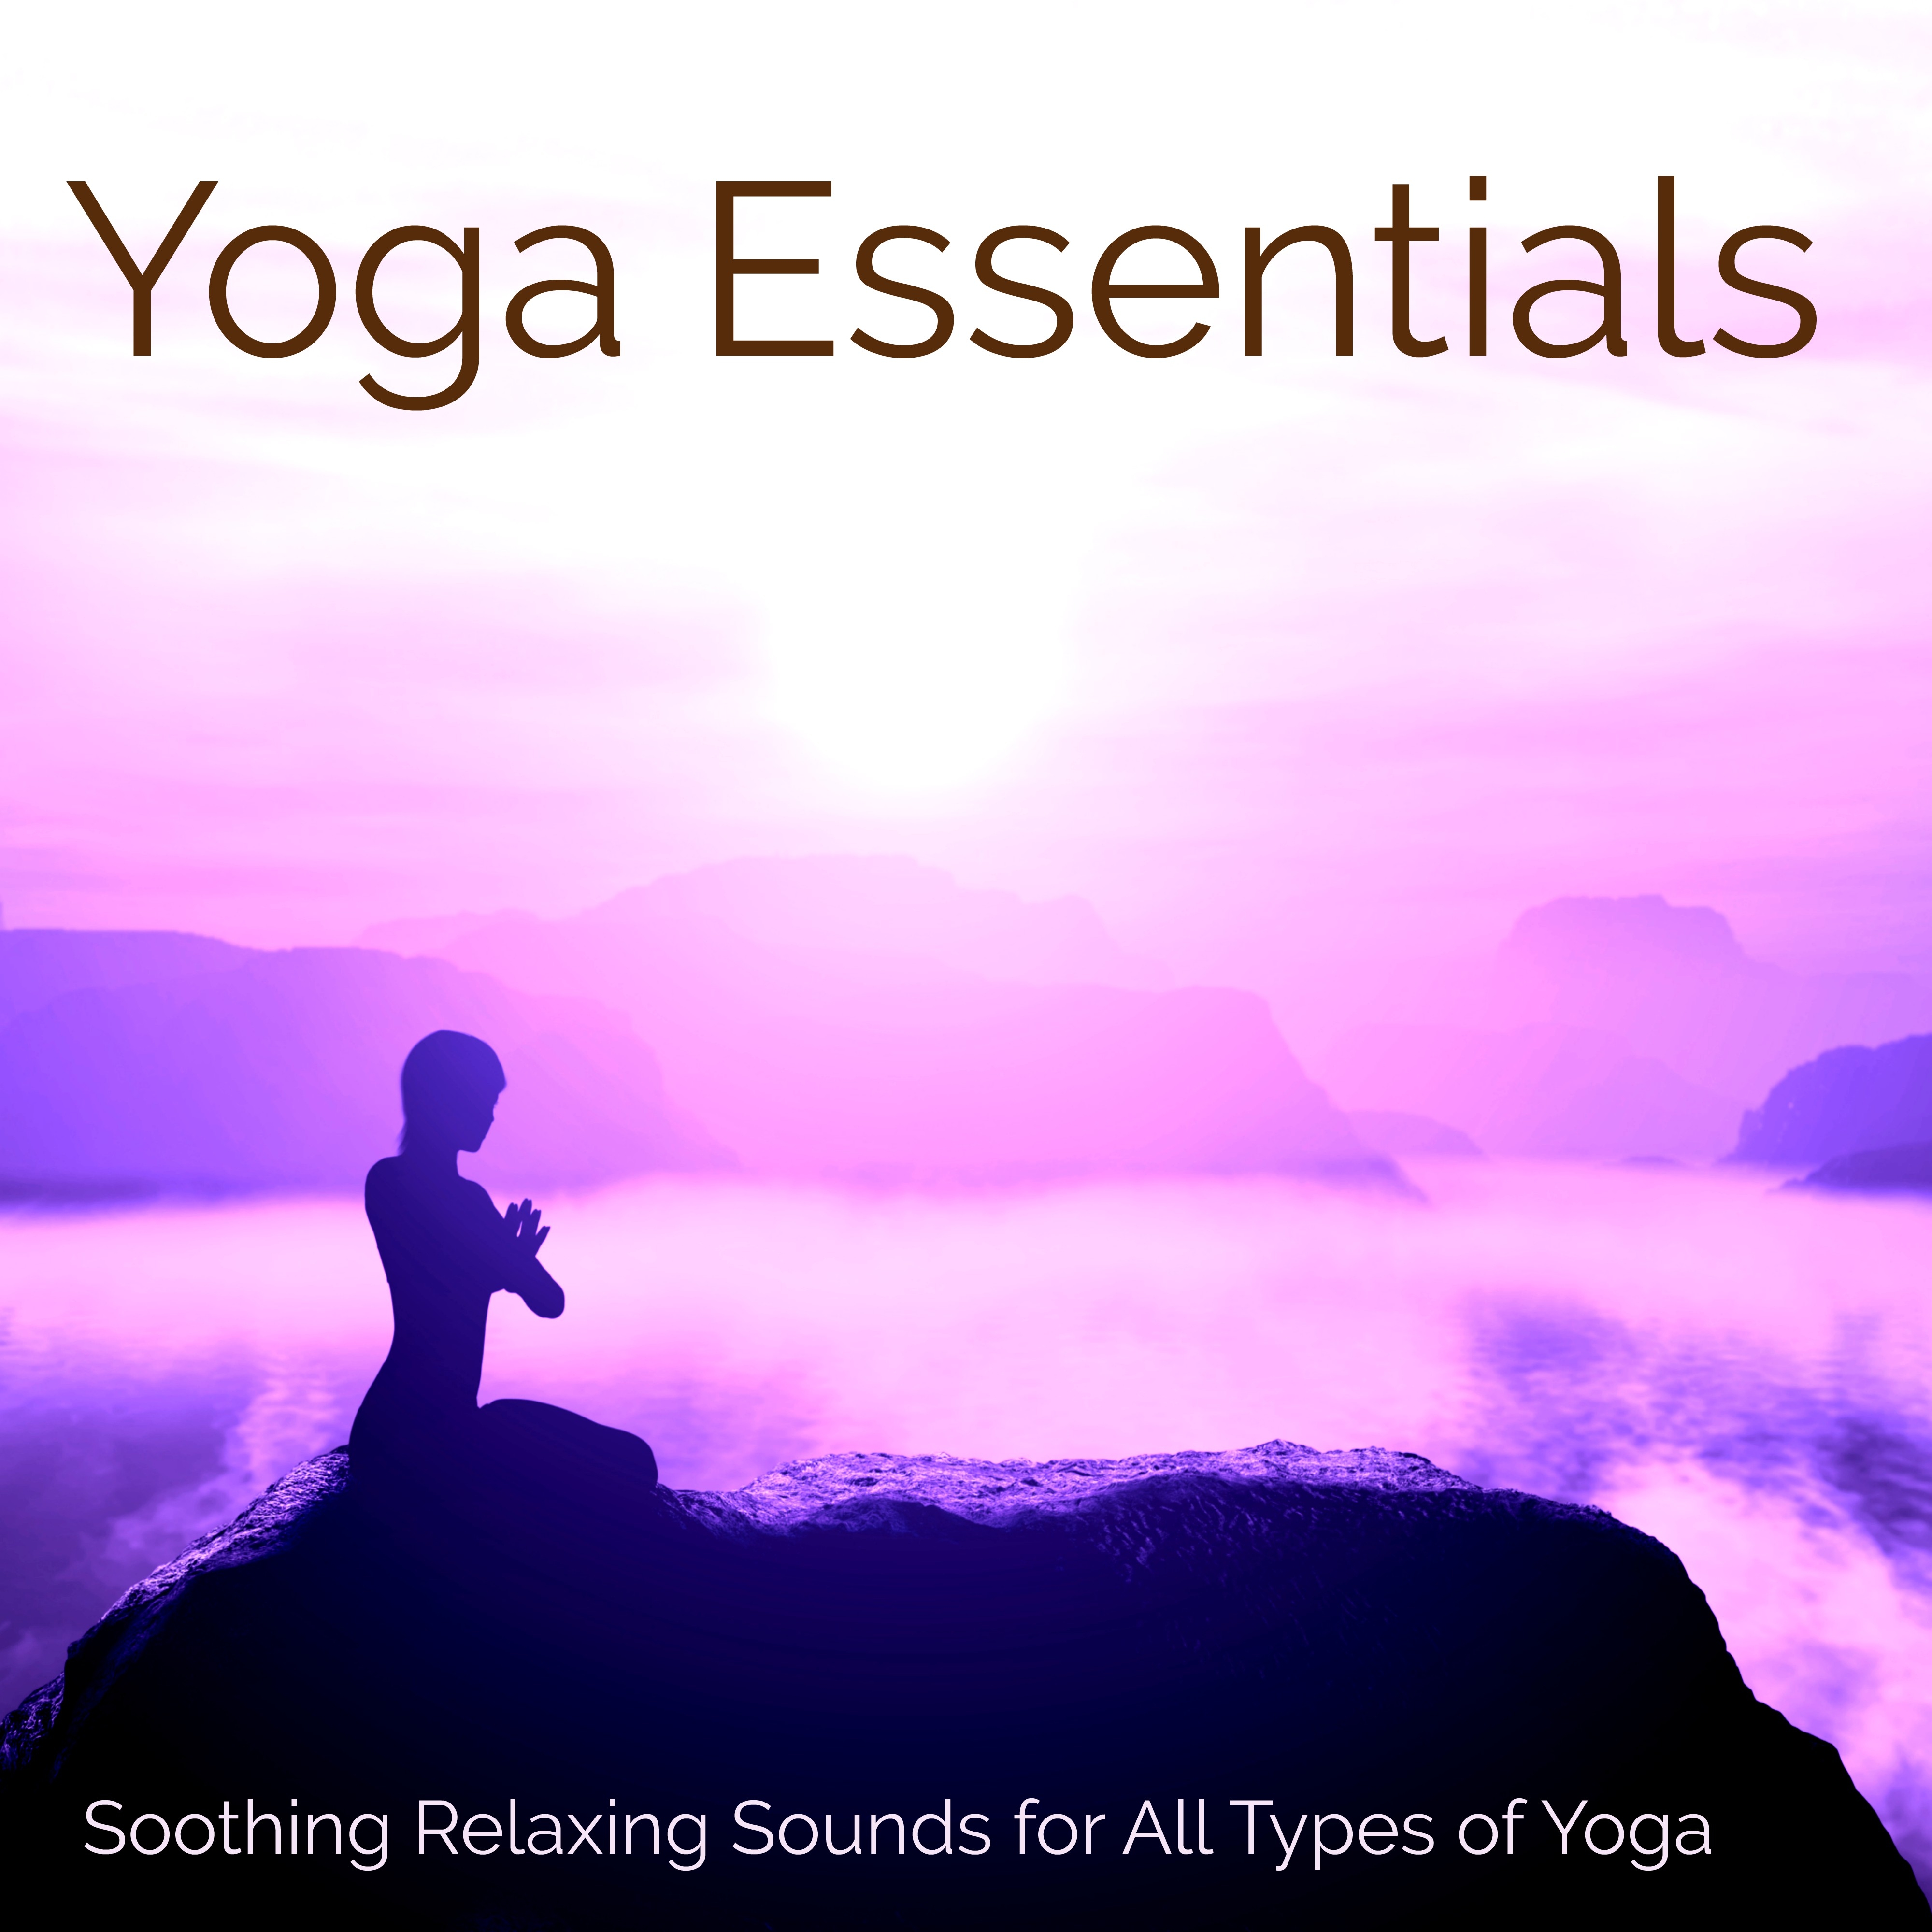 Yoga Essentials – Soothing Relaxing Sounds for All Types of Yoga